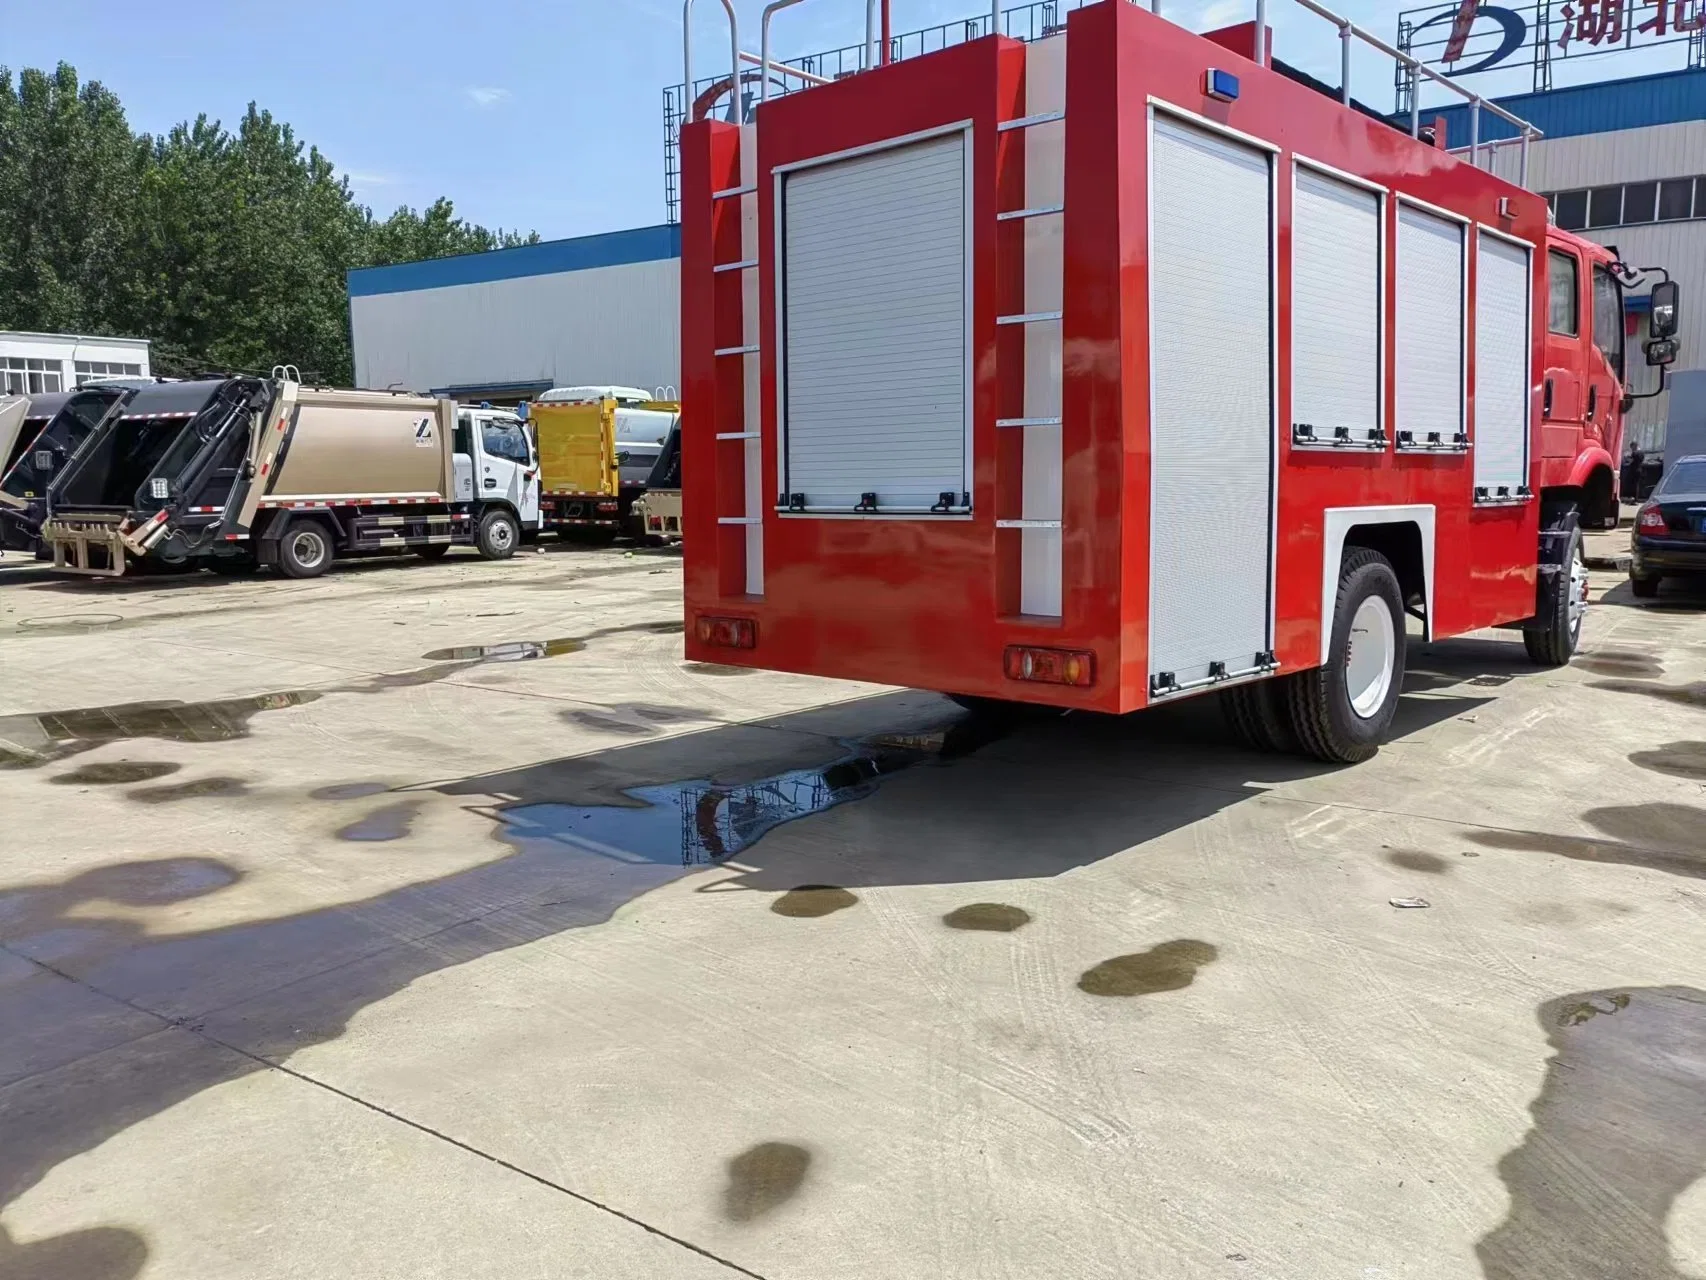 Dongfeng 190HP Fire Engine Truck